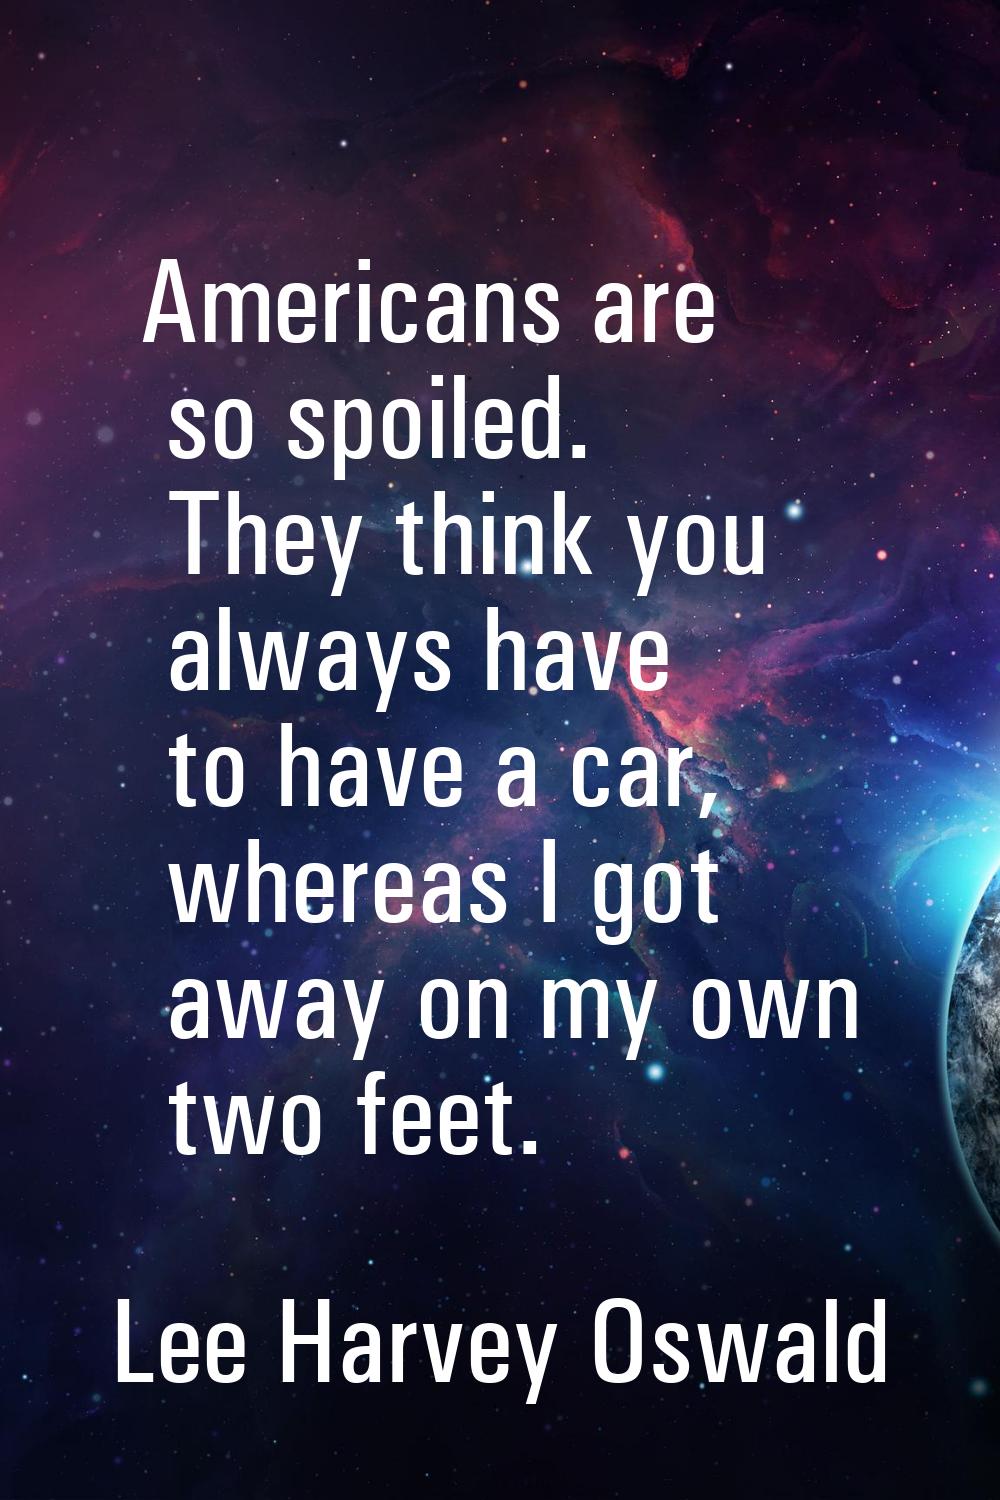 Americans are so spoiled. They think you always have to have a car, whereas I got away on my own tw